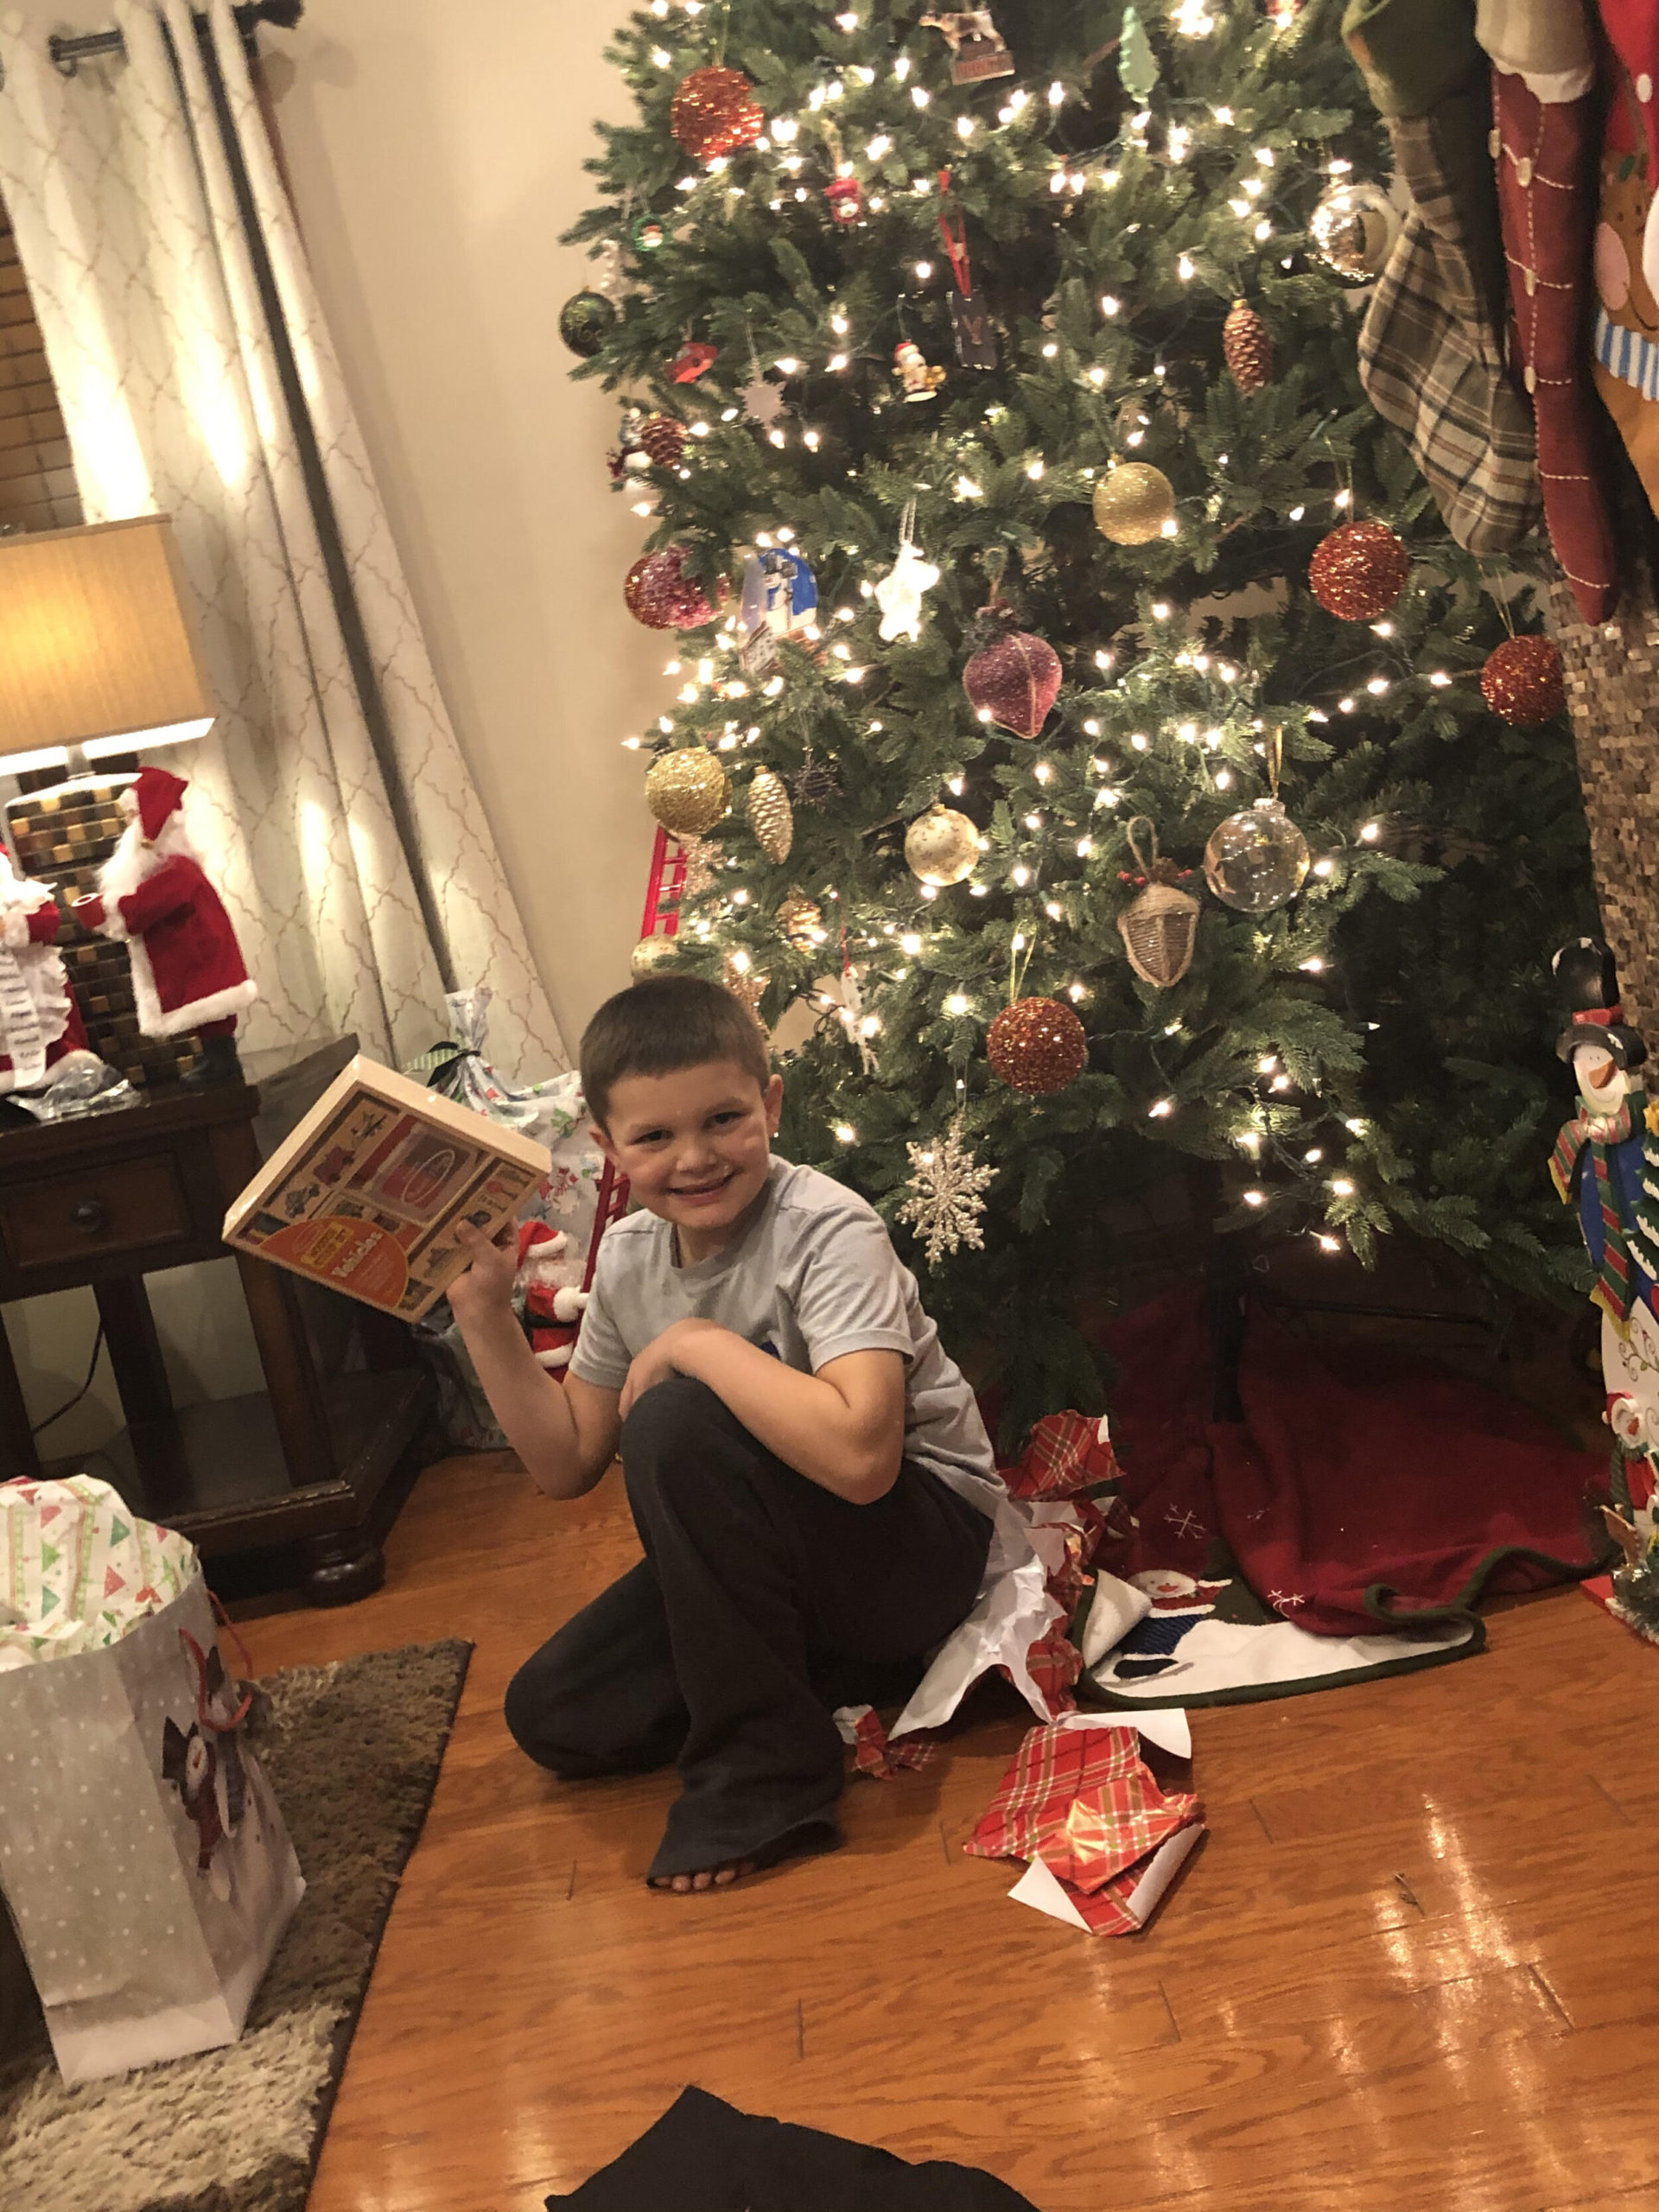 A boy smiling in front of a Christmas tree with his new present